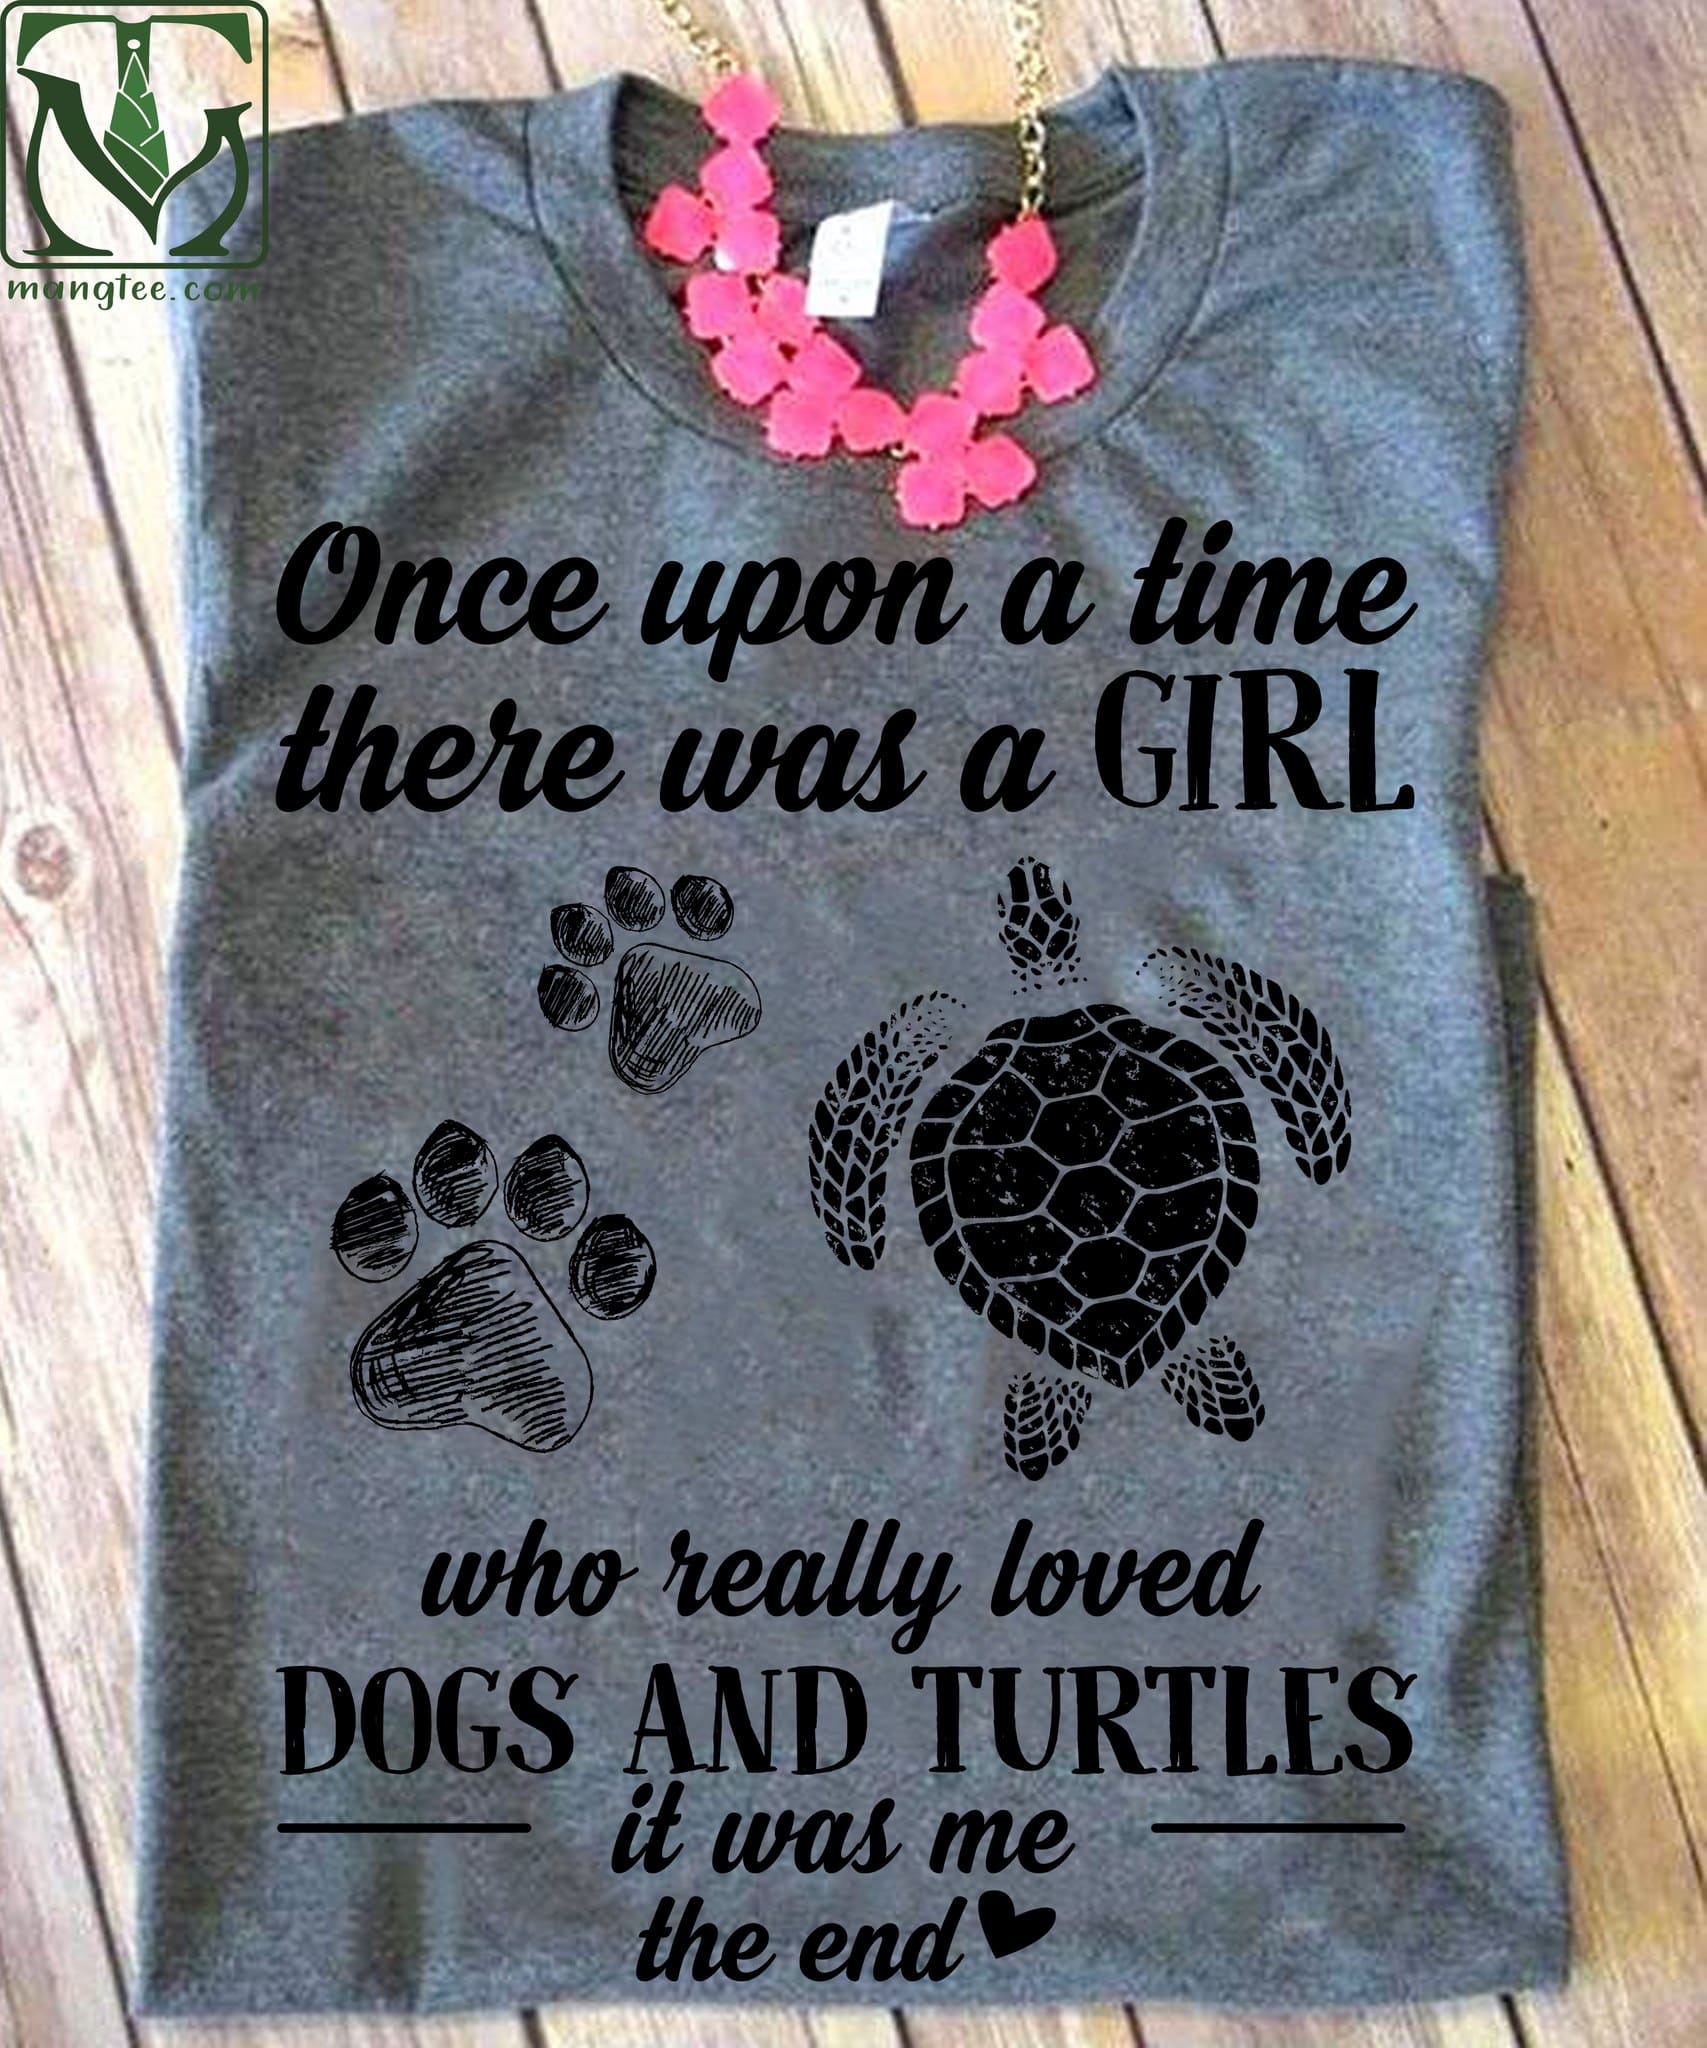 Once upon a time there was a girl who really loved dogs and turtles - Animal lover T-shirt, turtle and dog footprint